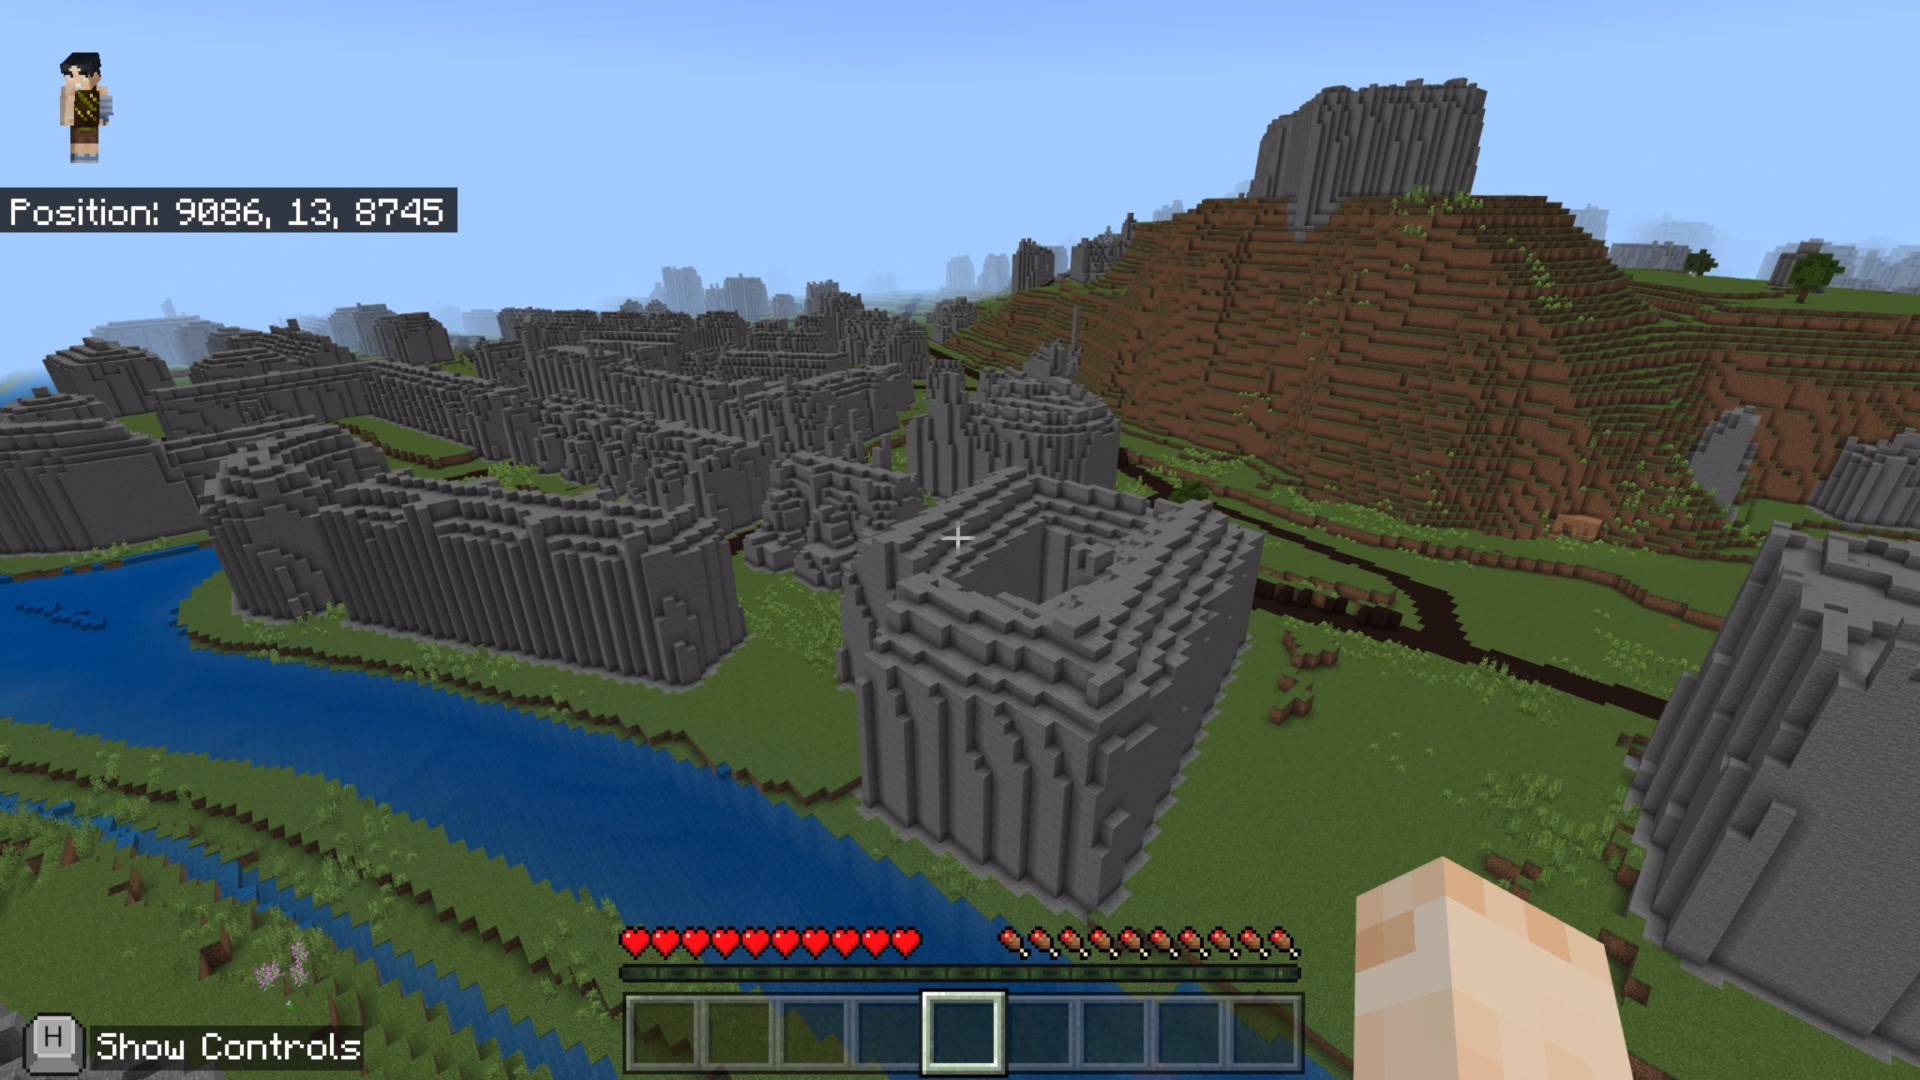 A view of Nottingham Castle which has been constructed inside the virtual world of Minecraft